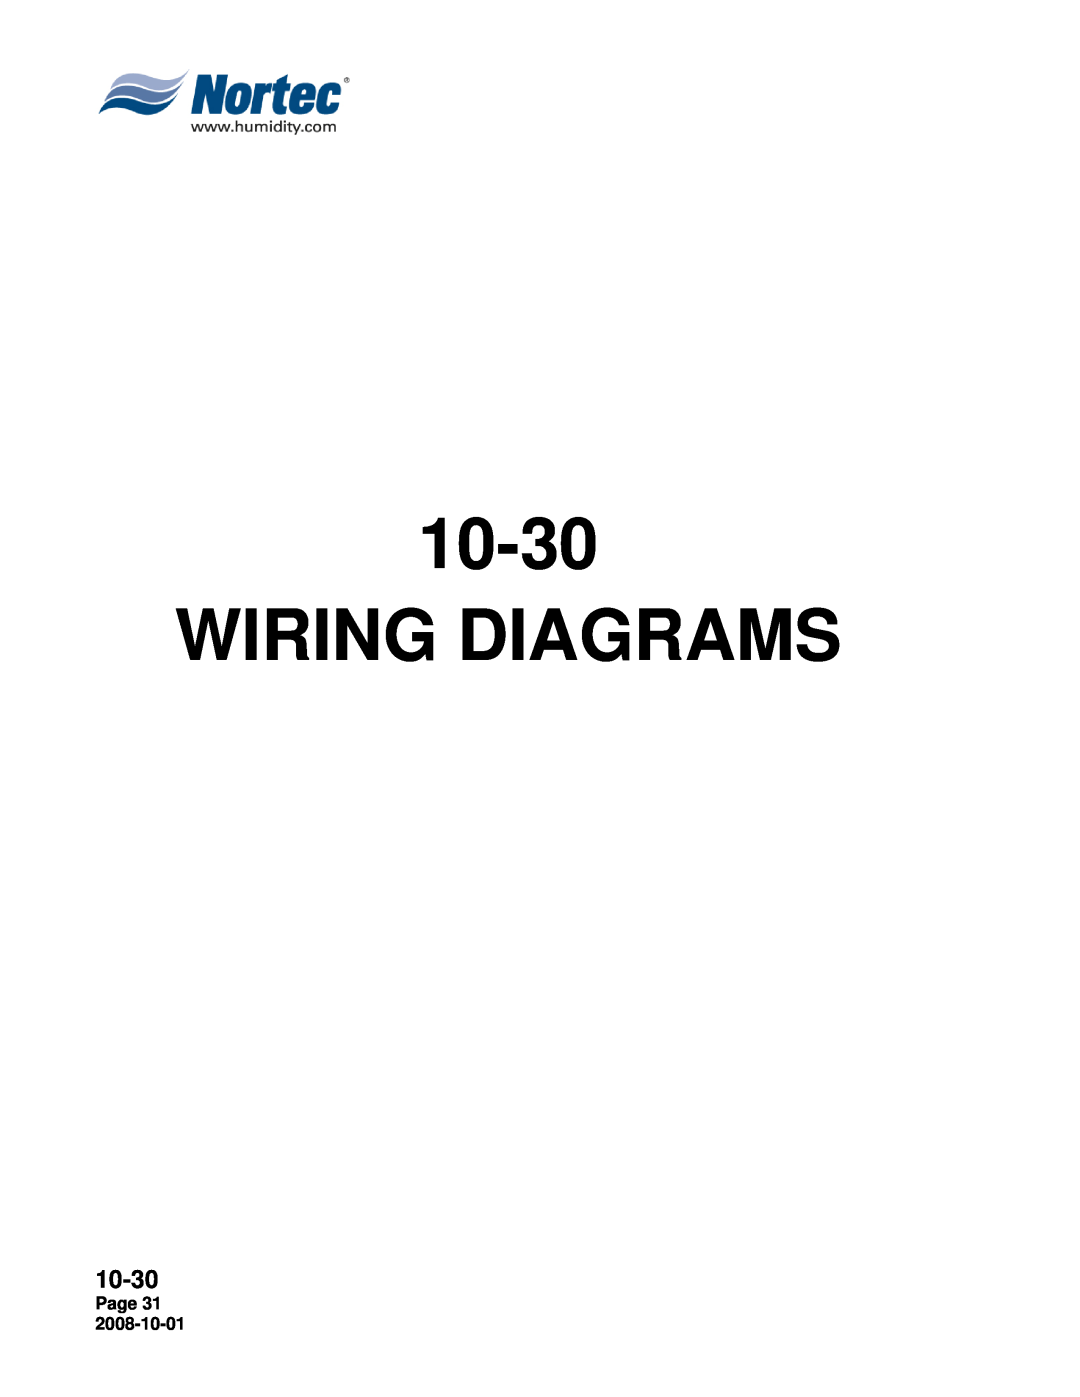 Nortec Industries NH Series installation manual Wiring Diagrams, 10-30, Page 